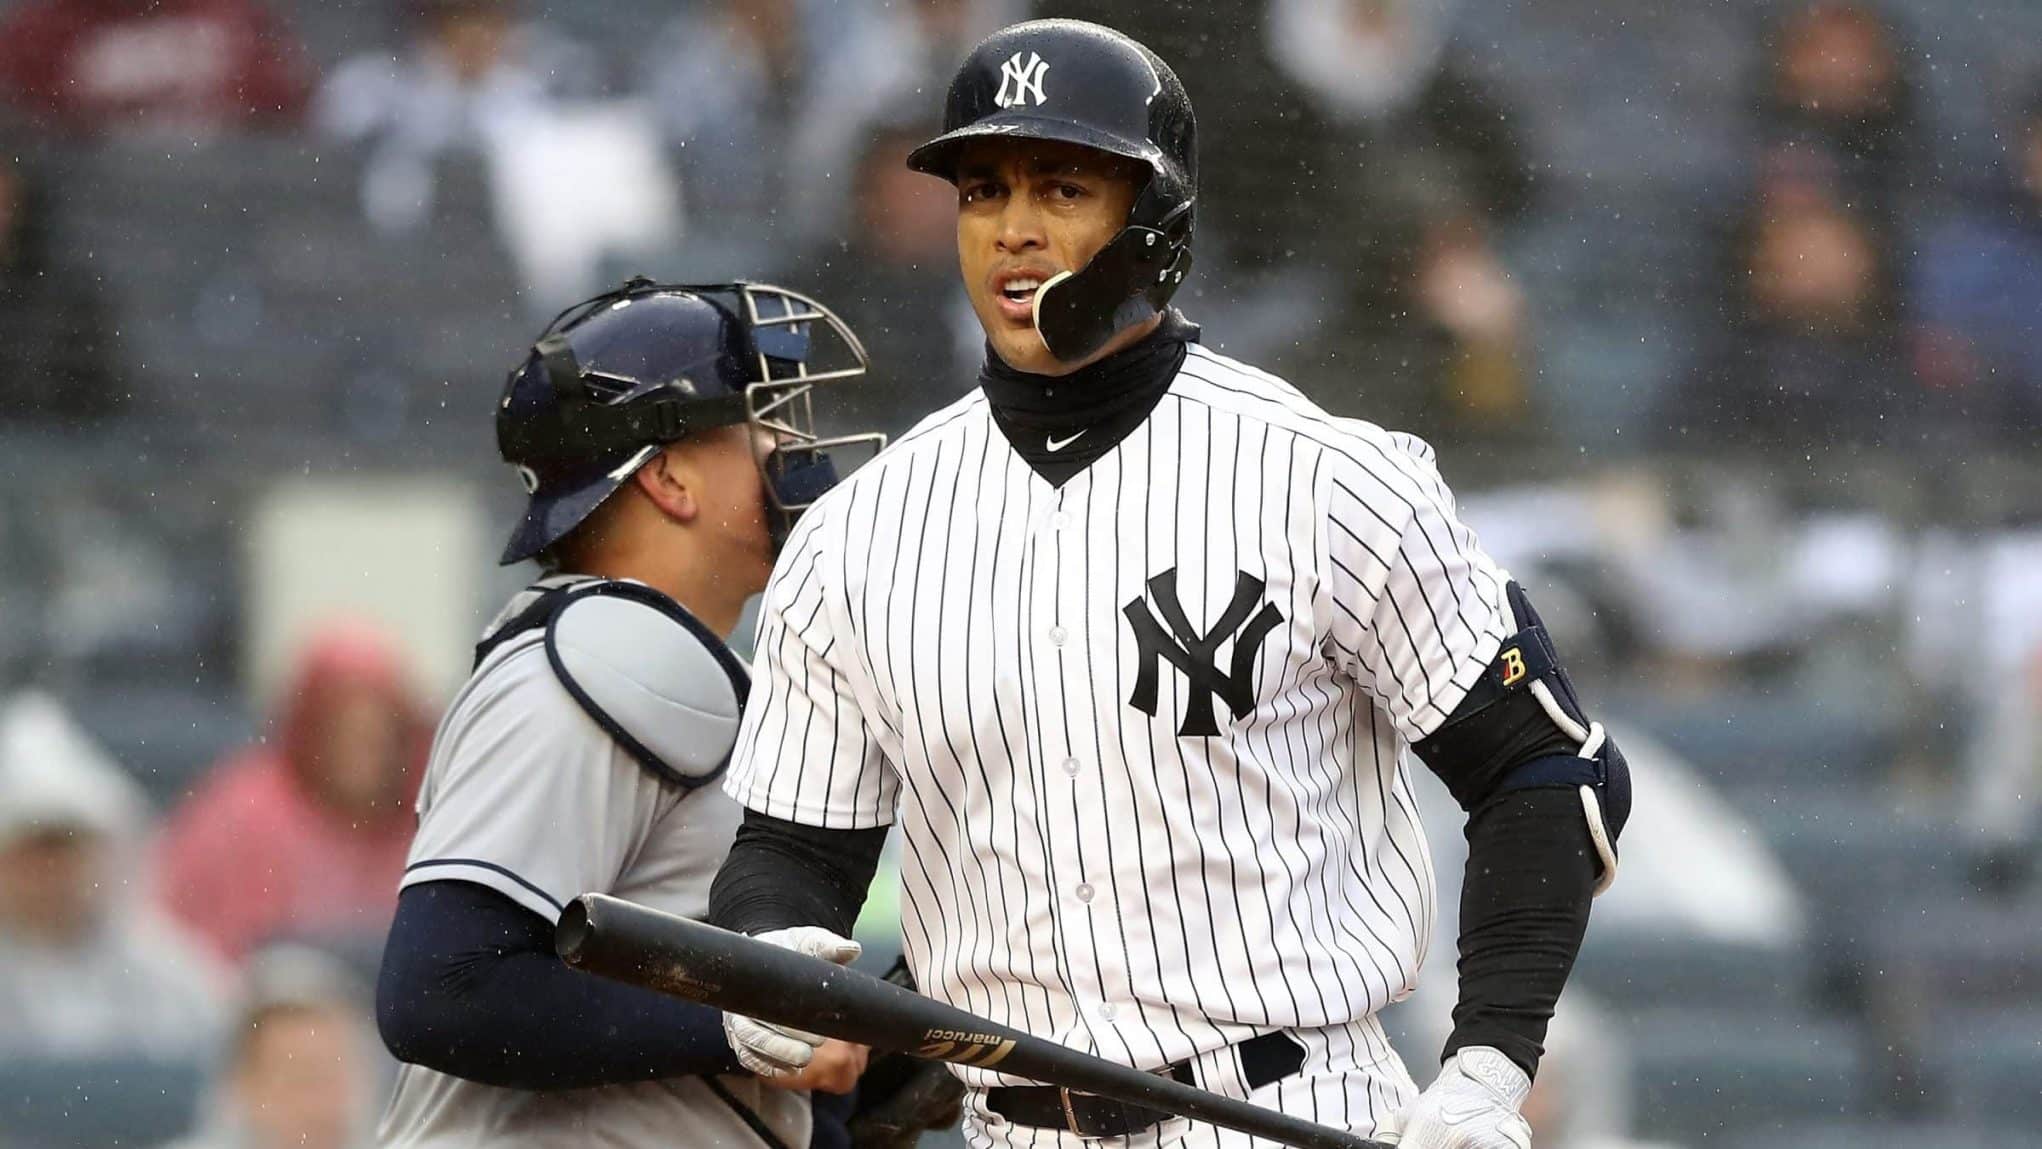 Giancarlo Stanton's struggles might force a lineup change for the Yankees